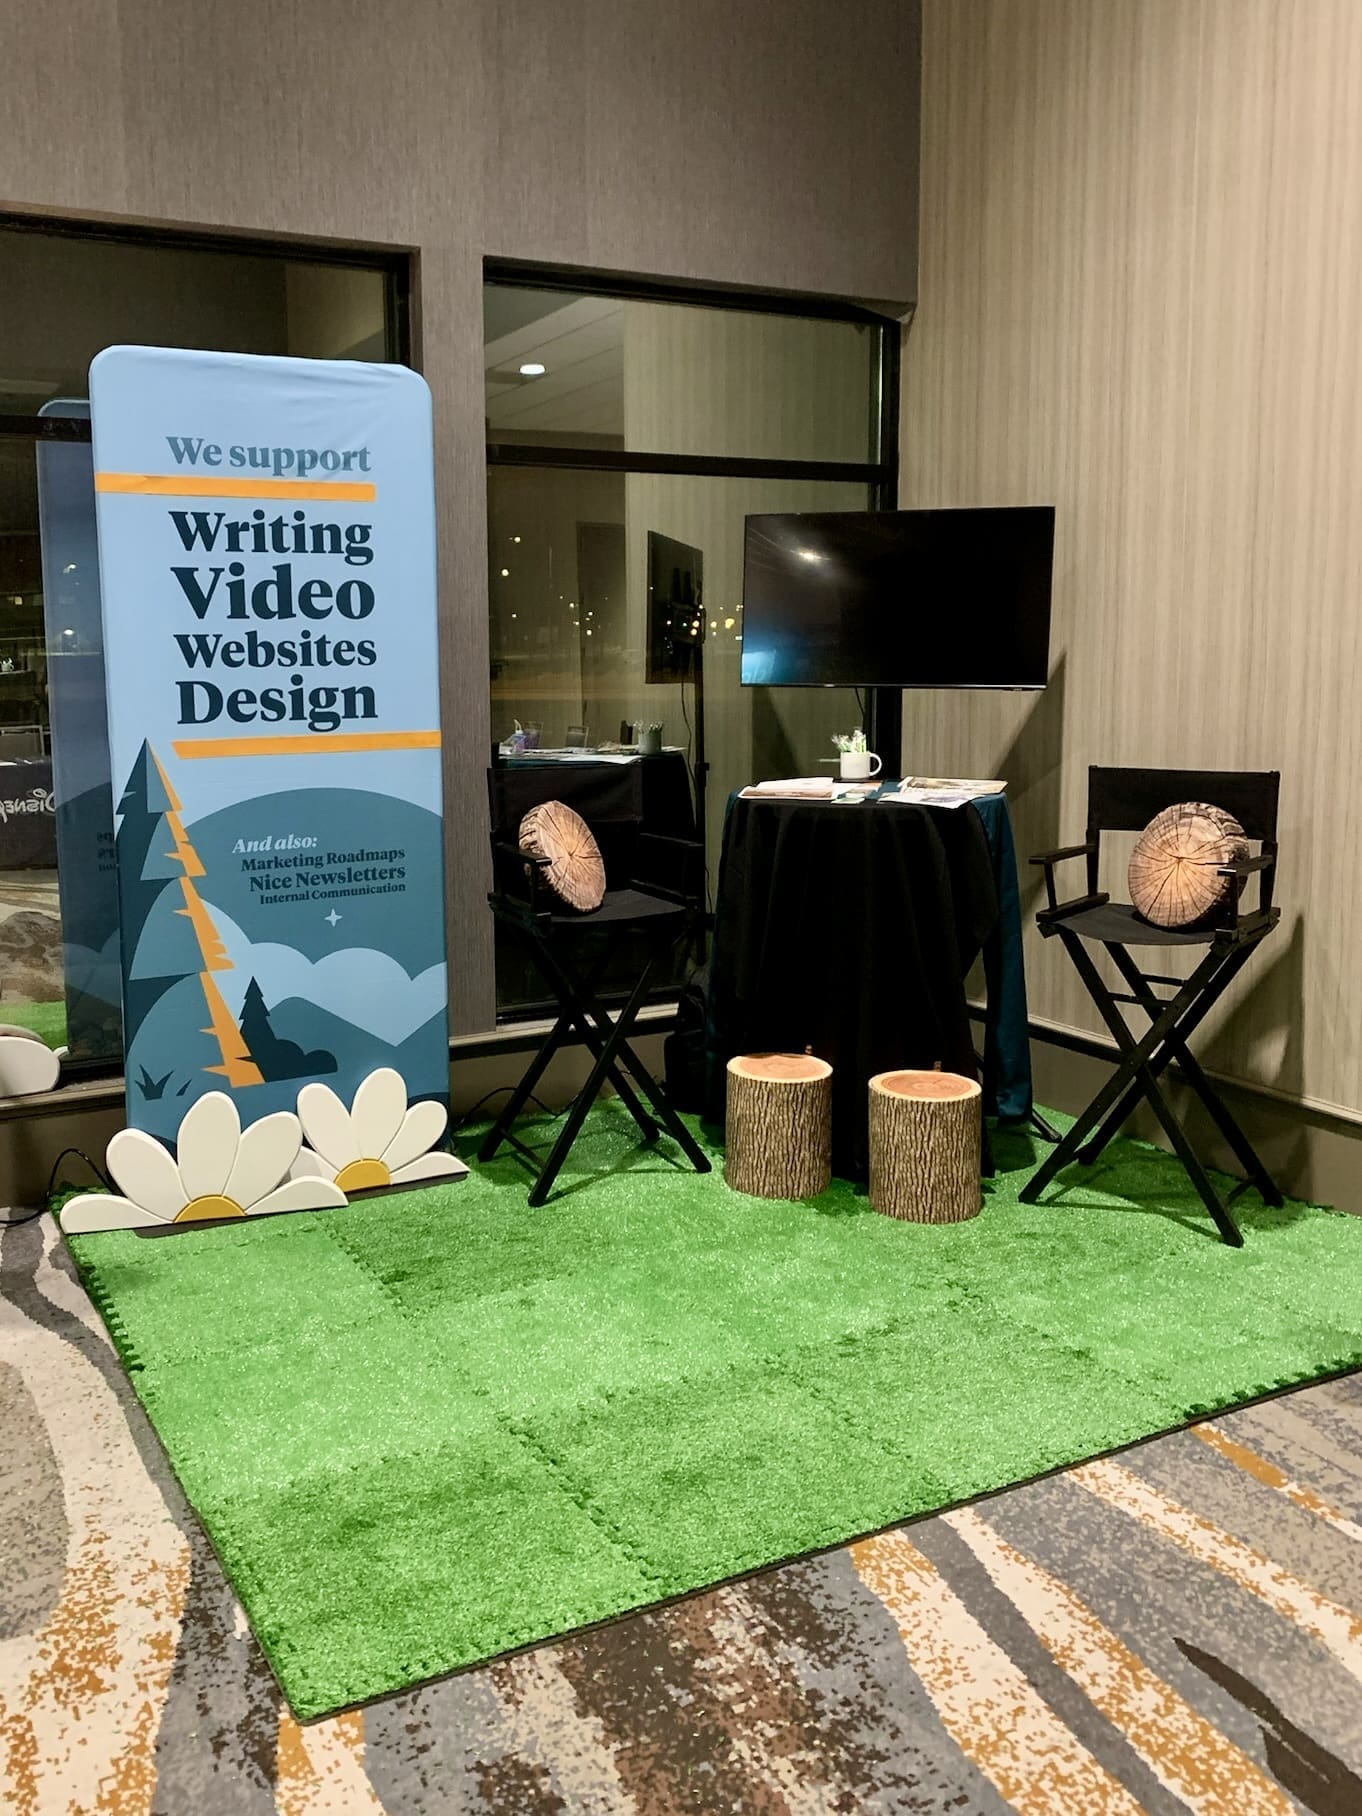 An exhibit booth at an indoor event featuring a vertical banner with text 'We support: Writing, Video, Websites, Design' and a list of other services. The booth has a faux grass area with two director's chairs and tree stump stools. A large flat-screen TV is turned off, mounted on a stand. The area is warmly lit, and reflections are visible in the glass window, indicating an evening setting.